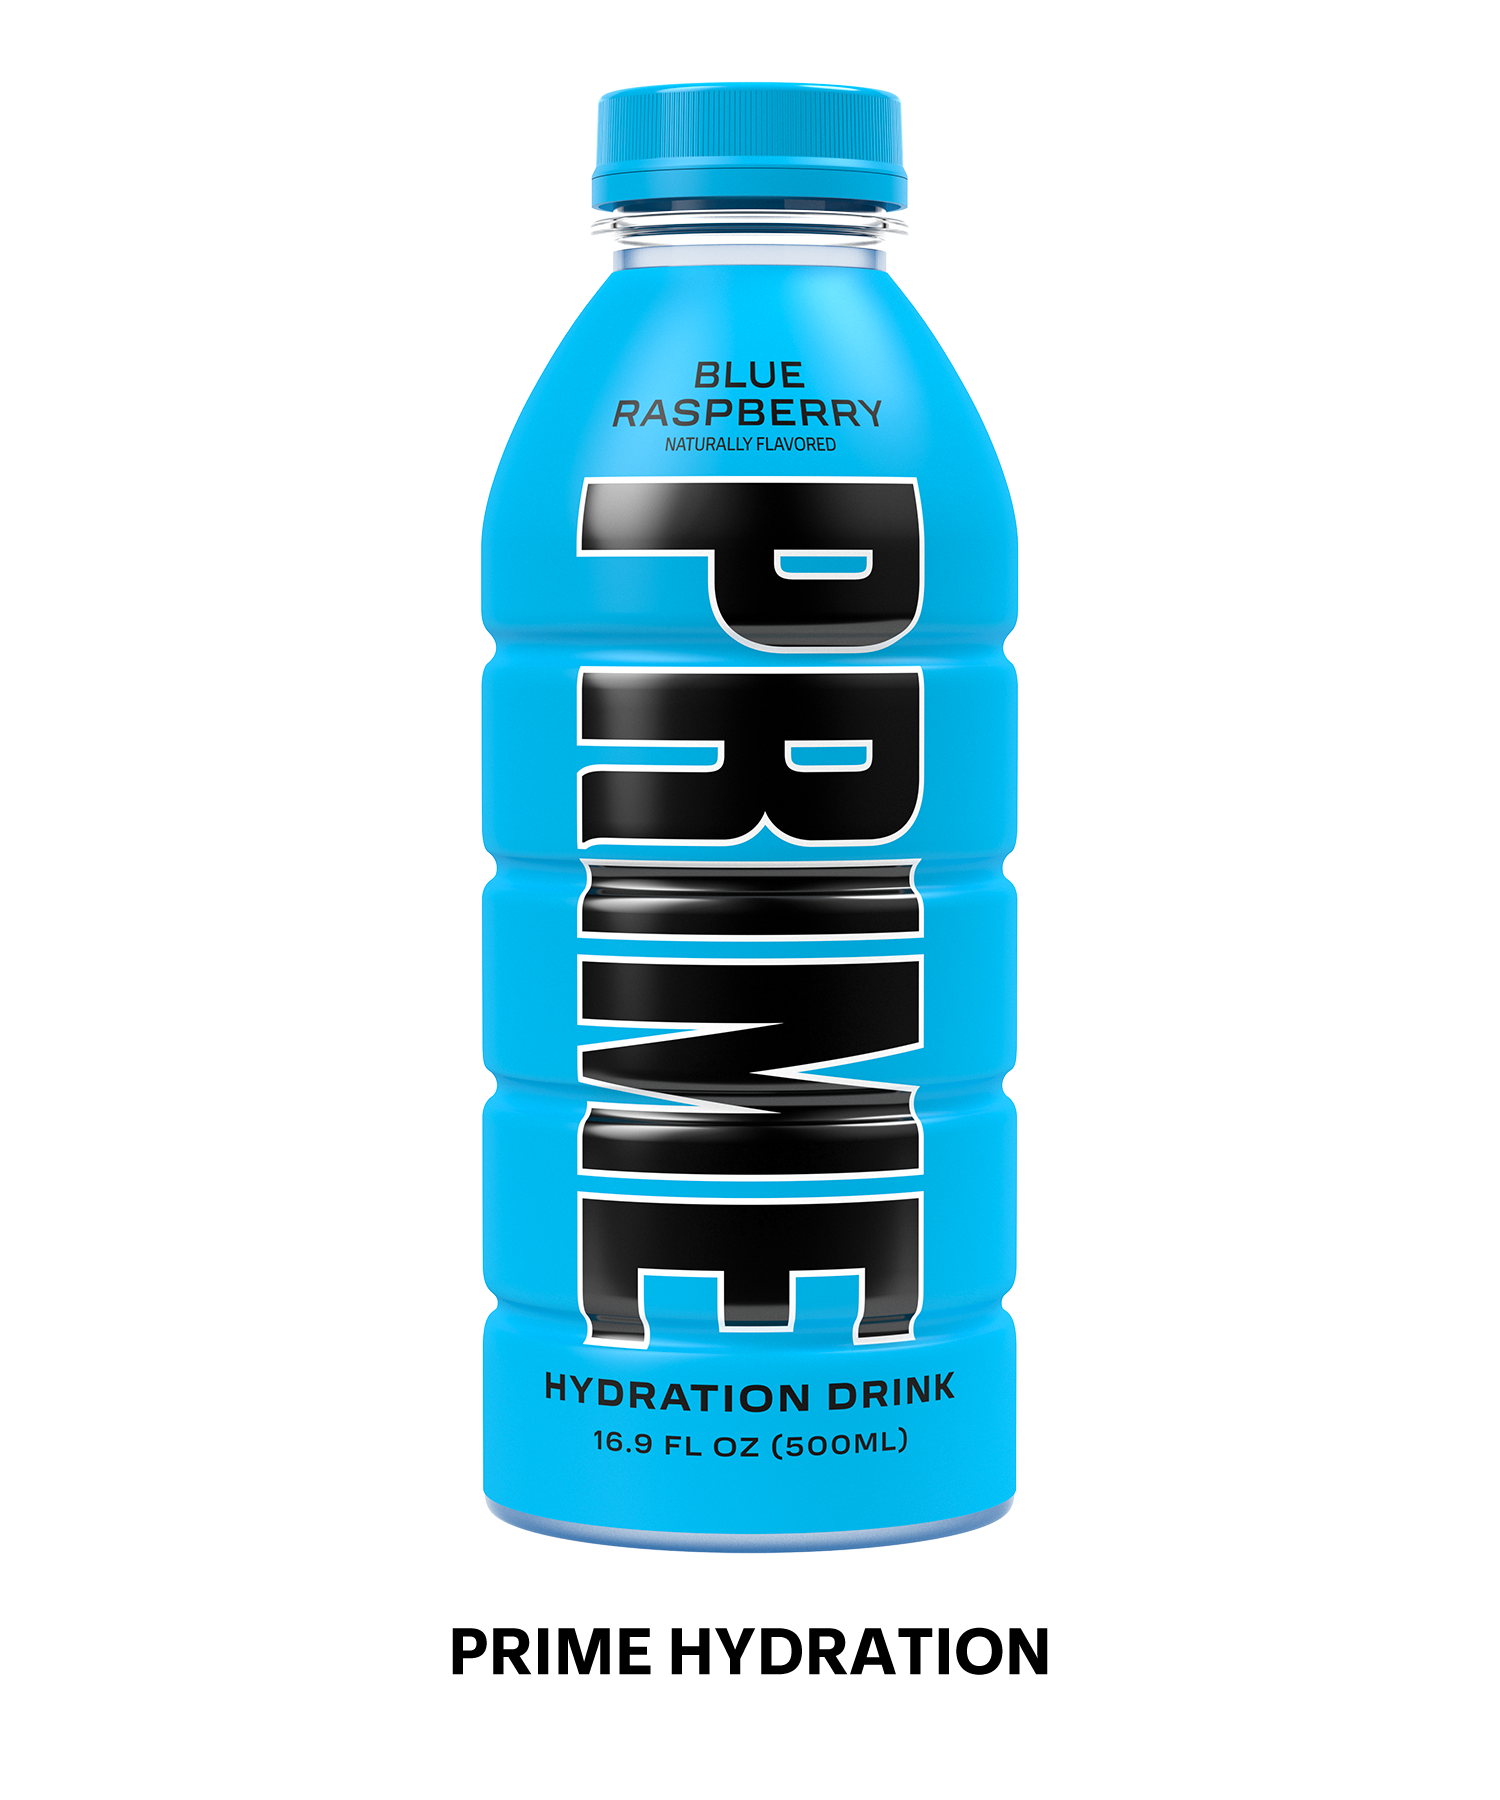 A Prime Hydration drink in flavor blue raspberry.